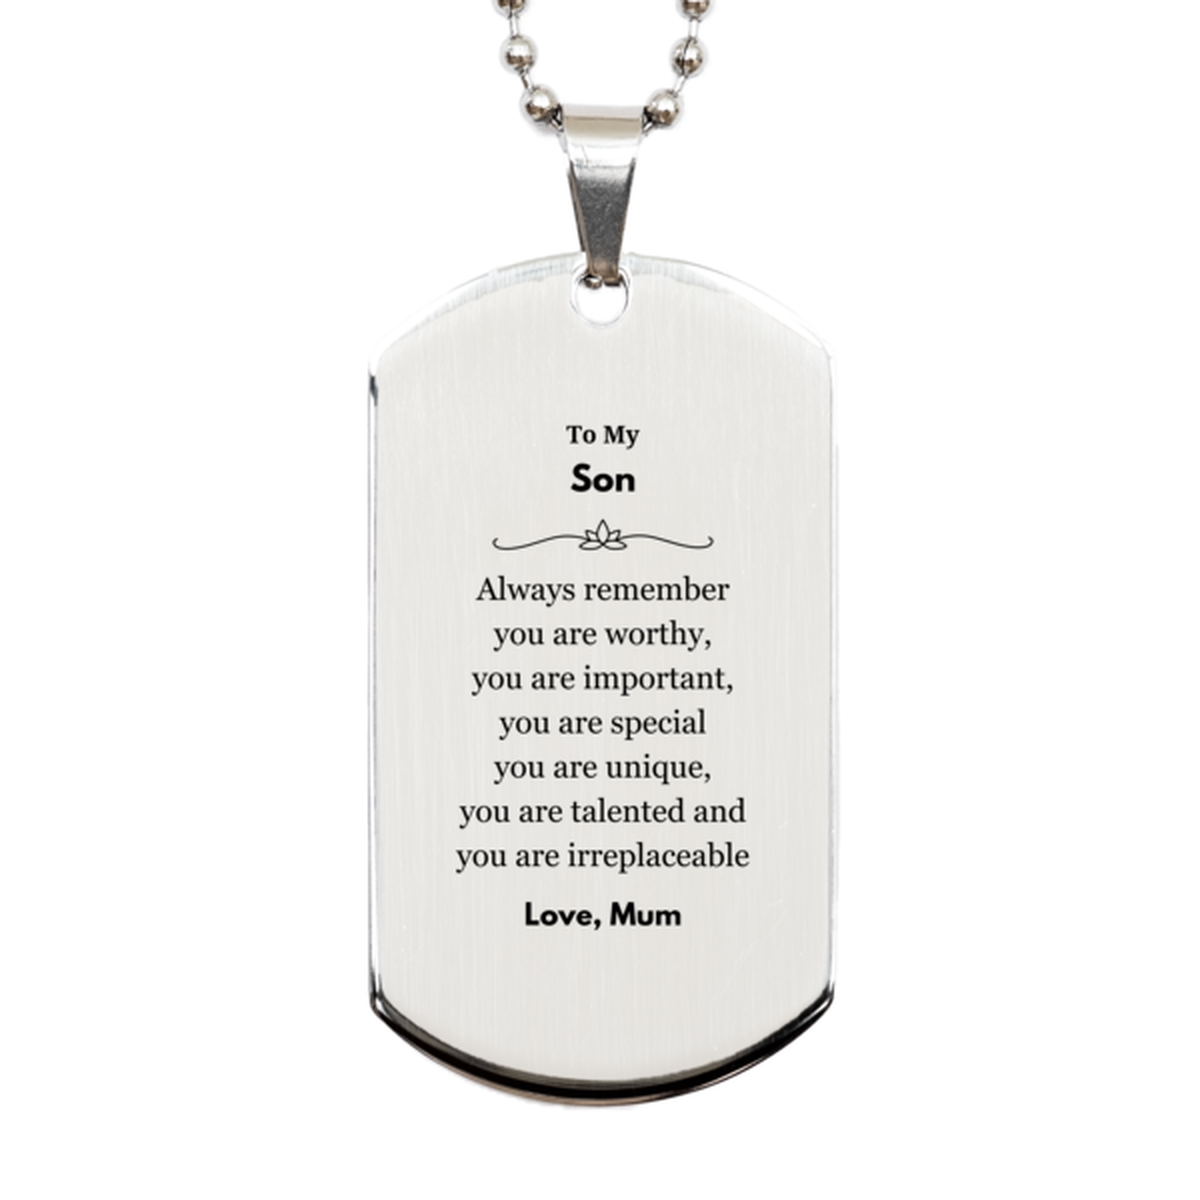 Son Birthday Gifts from Mum, Inspirational Silver Dog Tag for Son Christmas Graduation Gifts for Son Always remember you are worthy, you are important. Love, Mum